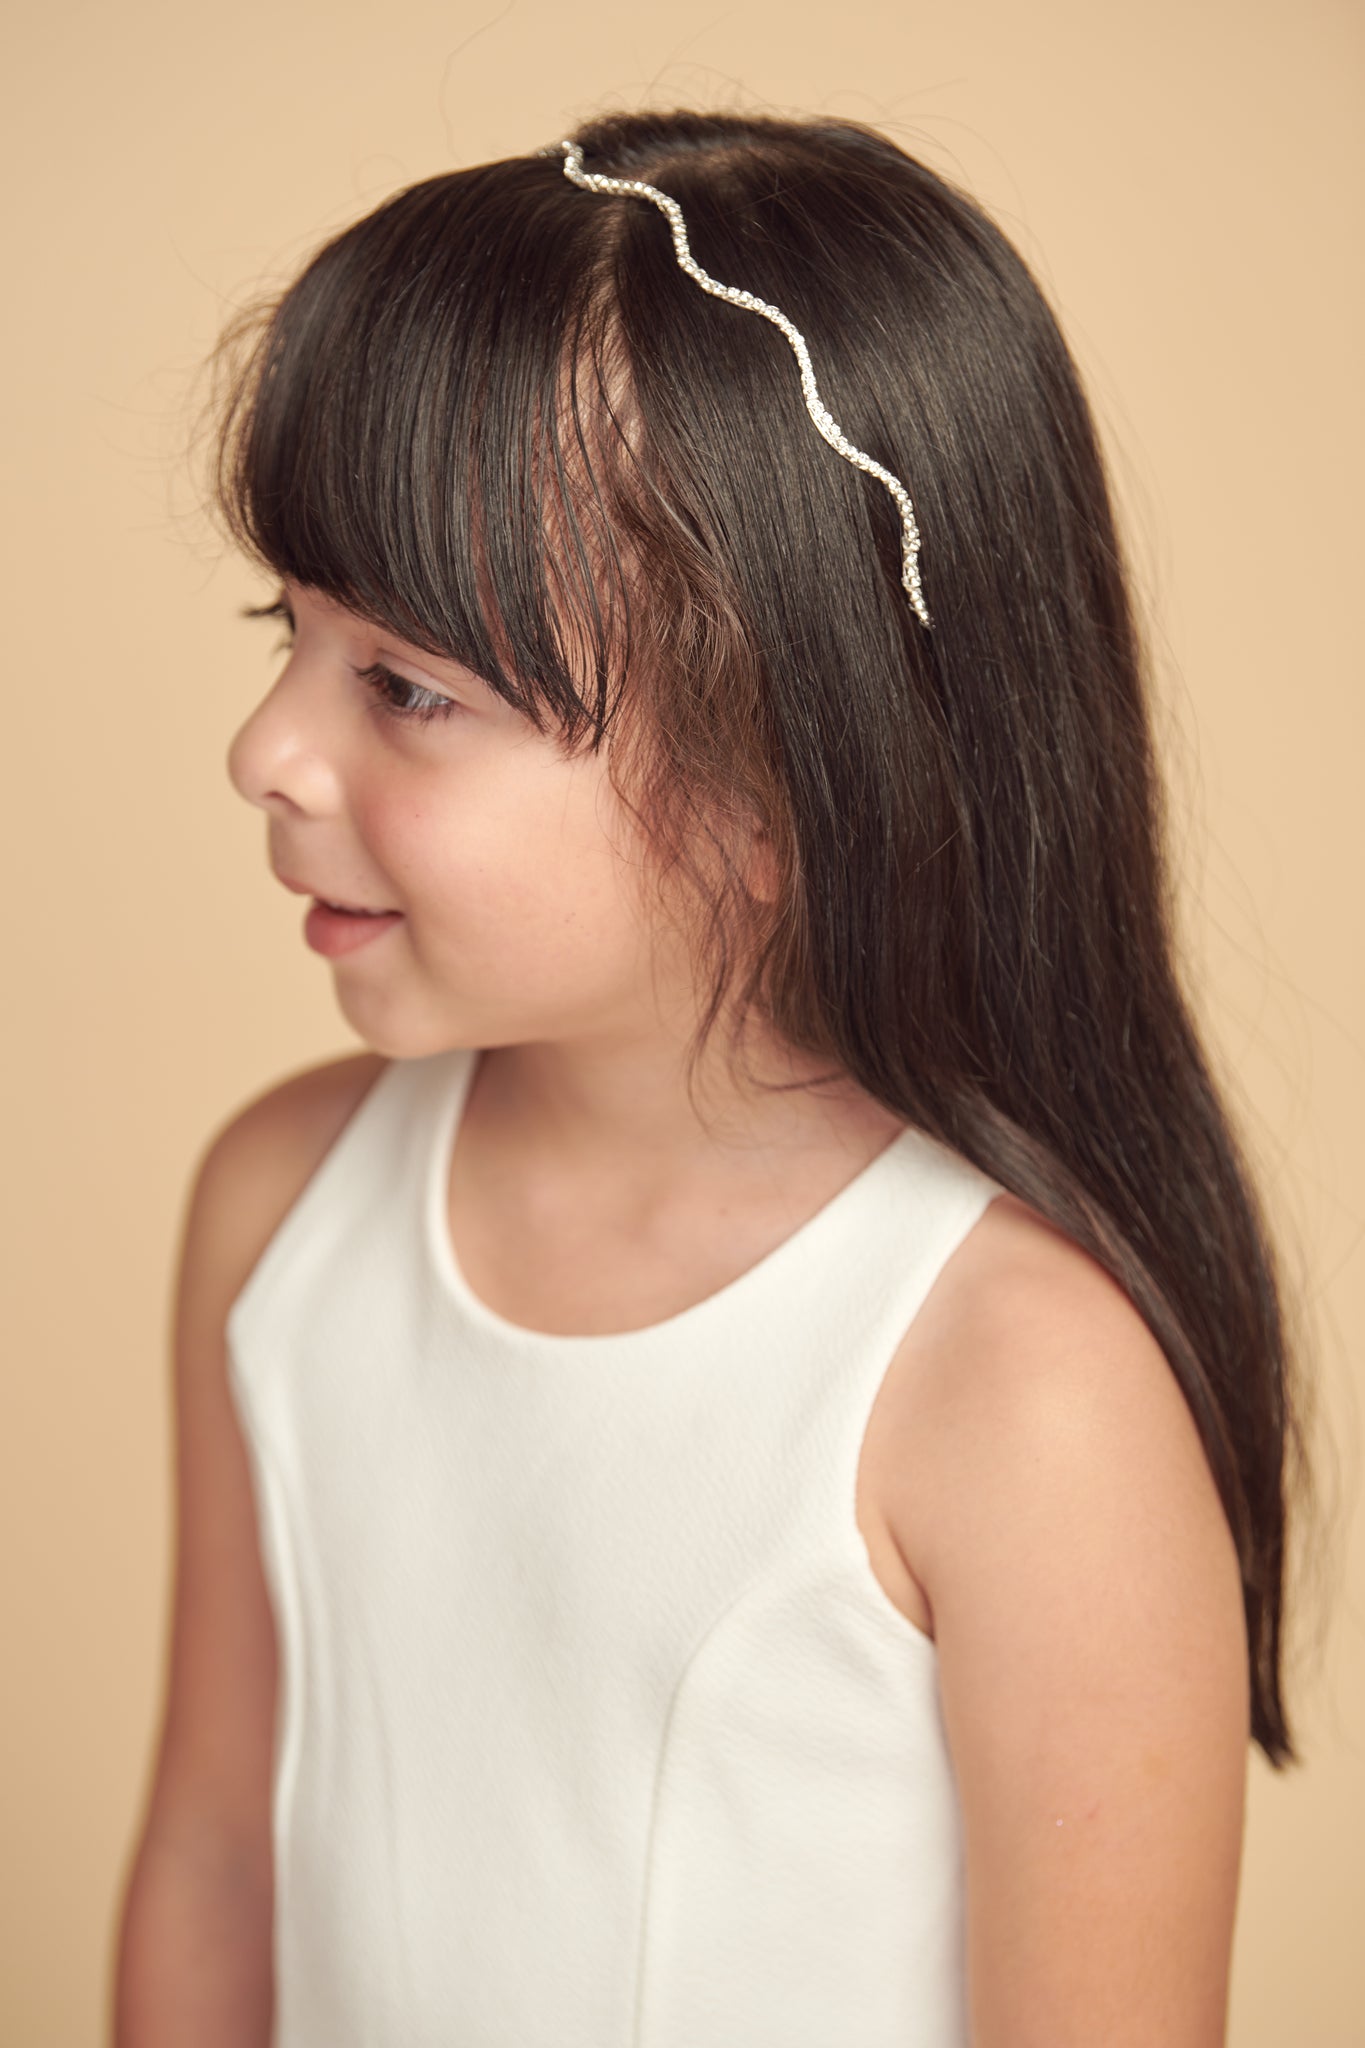 Crystal headband with scalloped rhinsteones. Made for young girls, tweens. teens and women. Has a soft base for comfort.